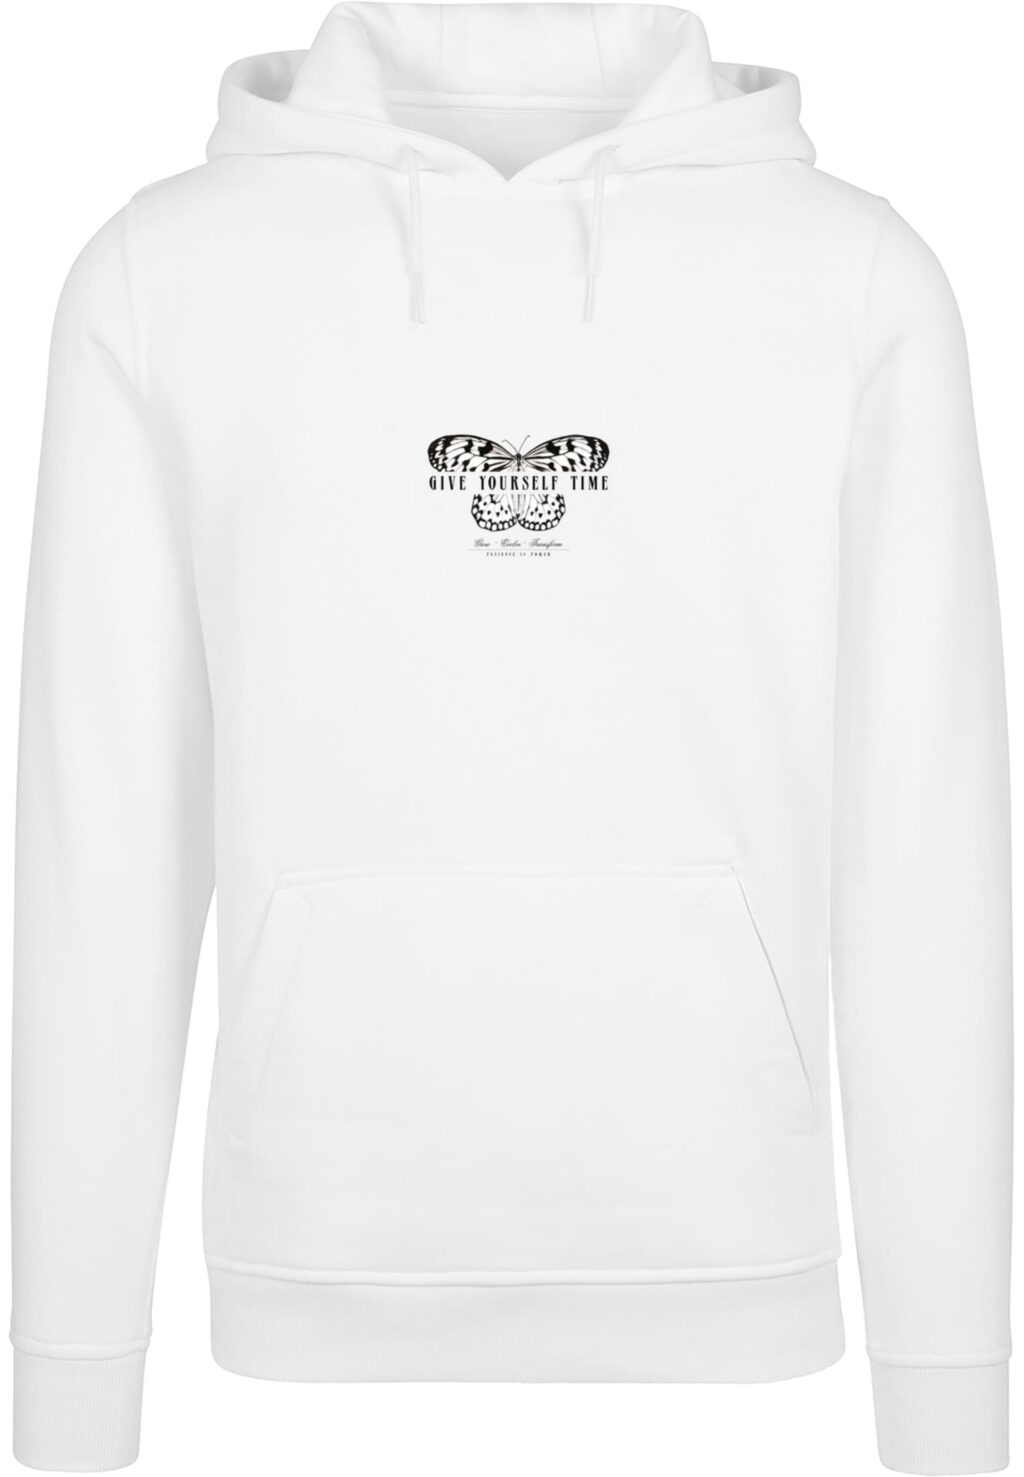 Give Yourself Time Hoody white MT3031